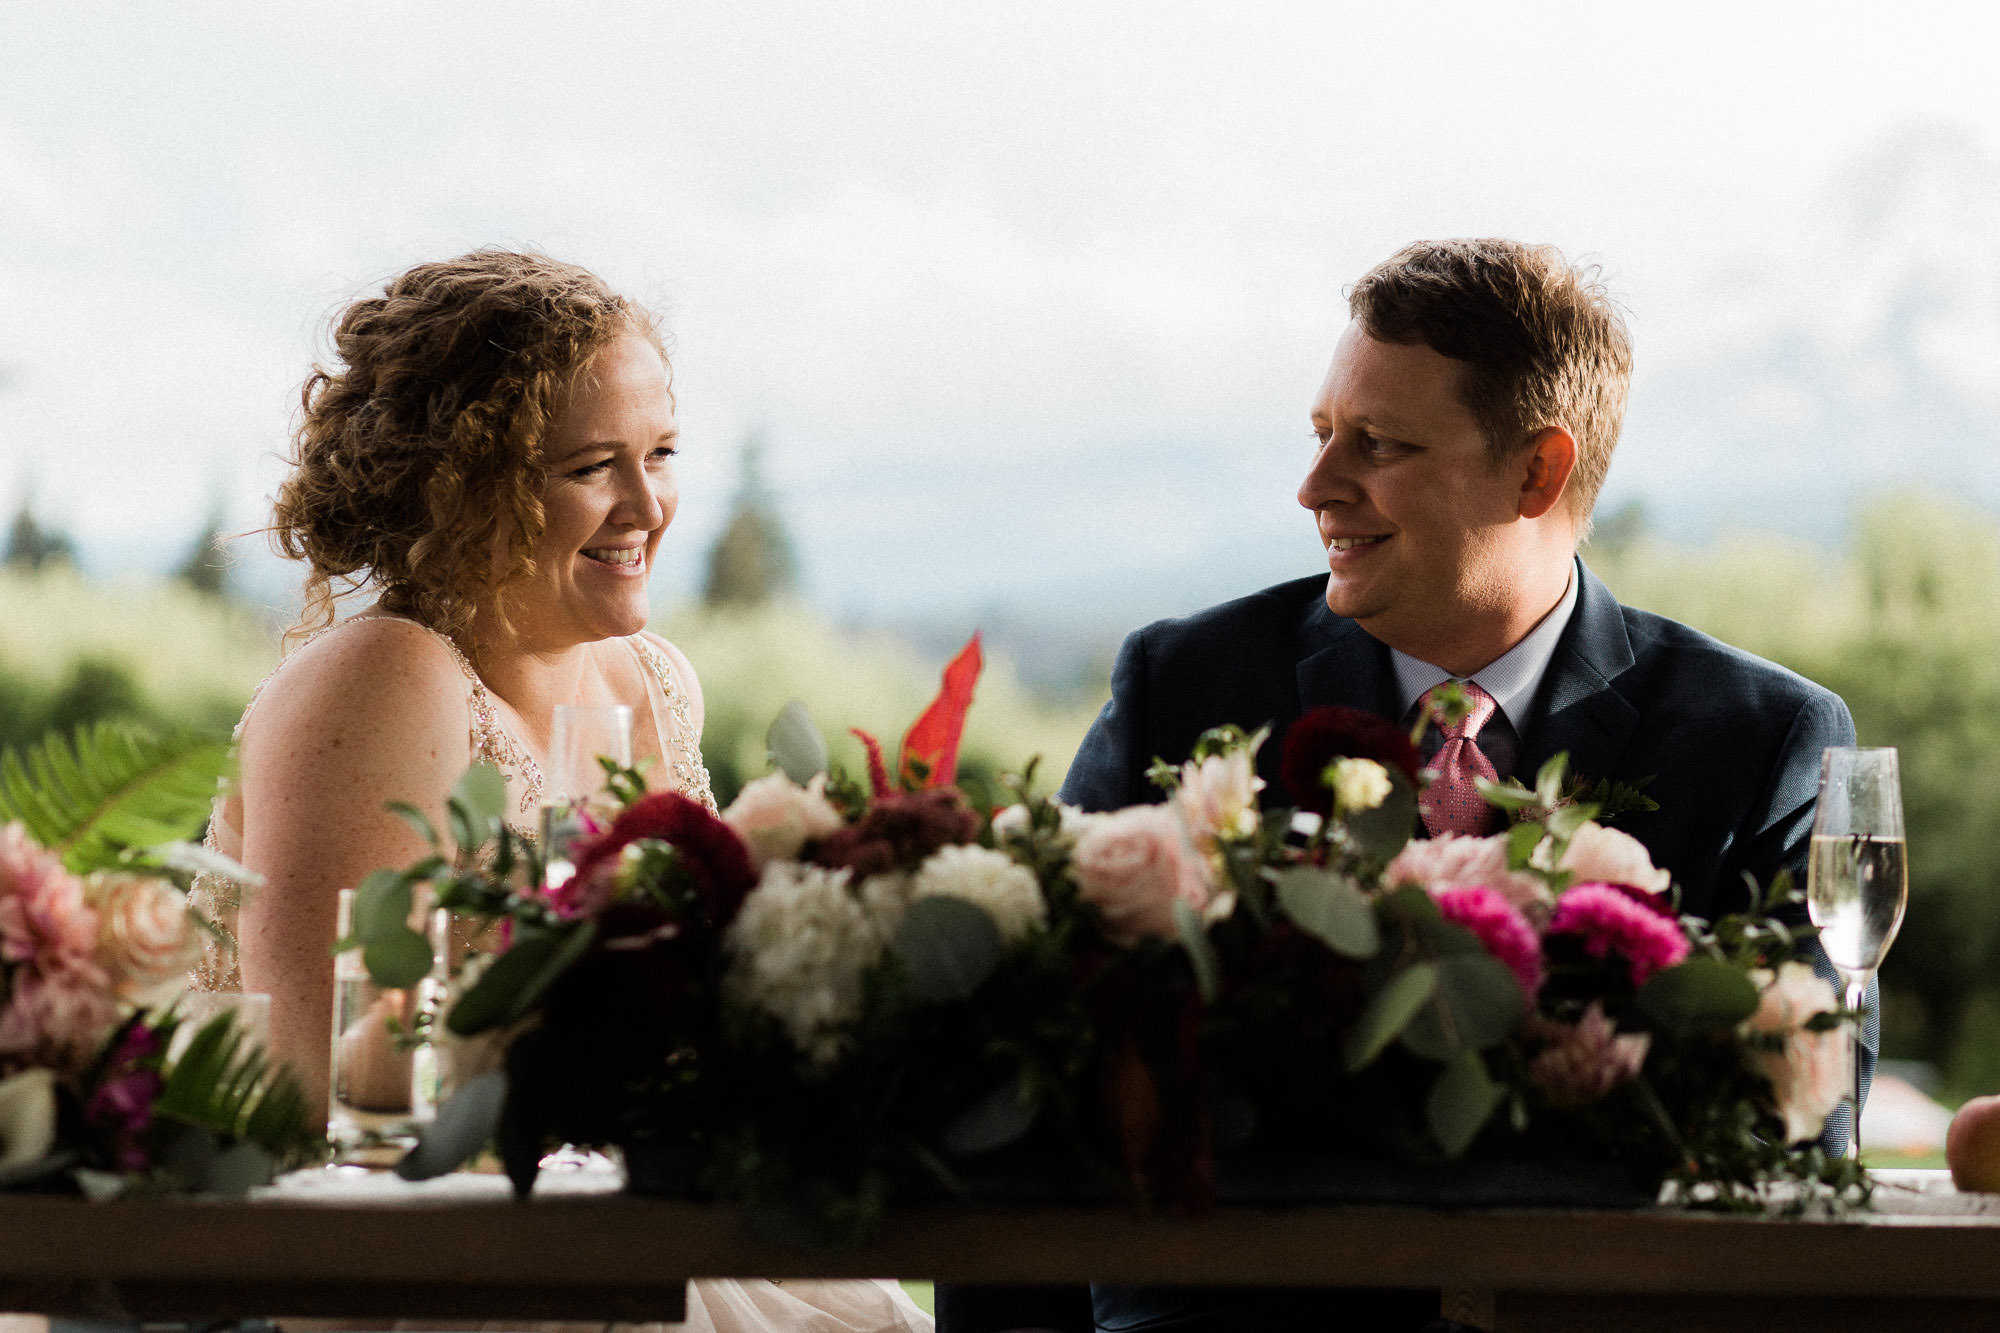 The bride and groom smile while guests give toasts at Mt. View Orchards in Oregon.